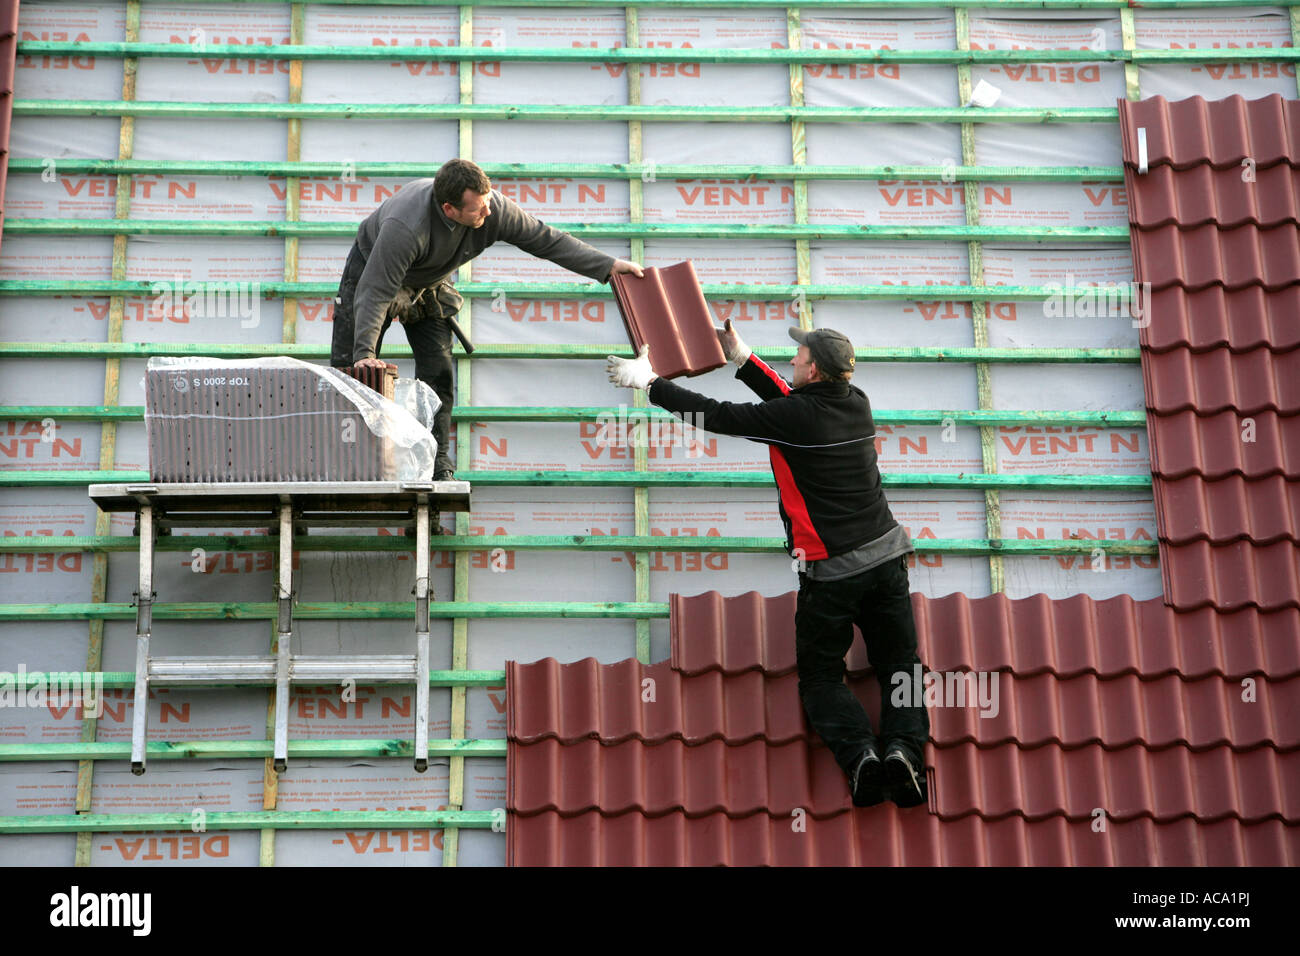 Roof tilers tiling a pointed roof of an apartment house, Essen, North Rhine-Westphalia, Germany Stock Photo